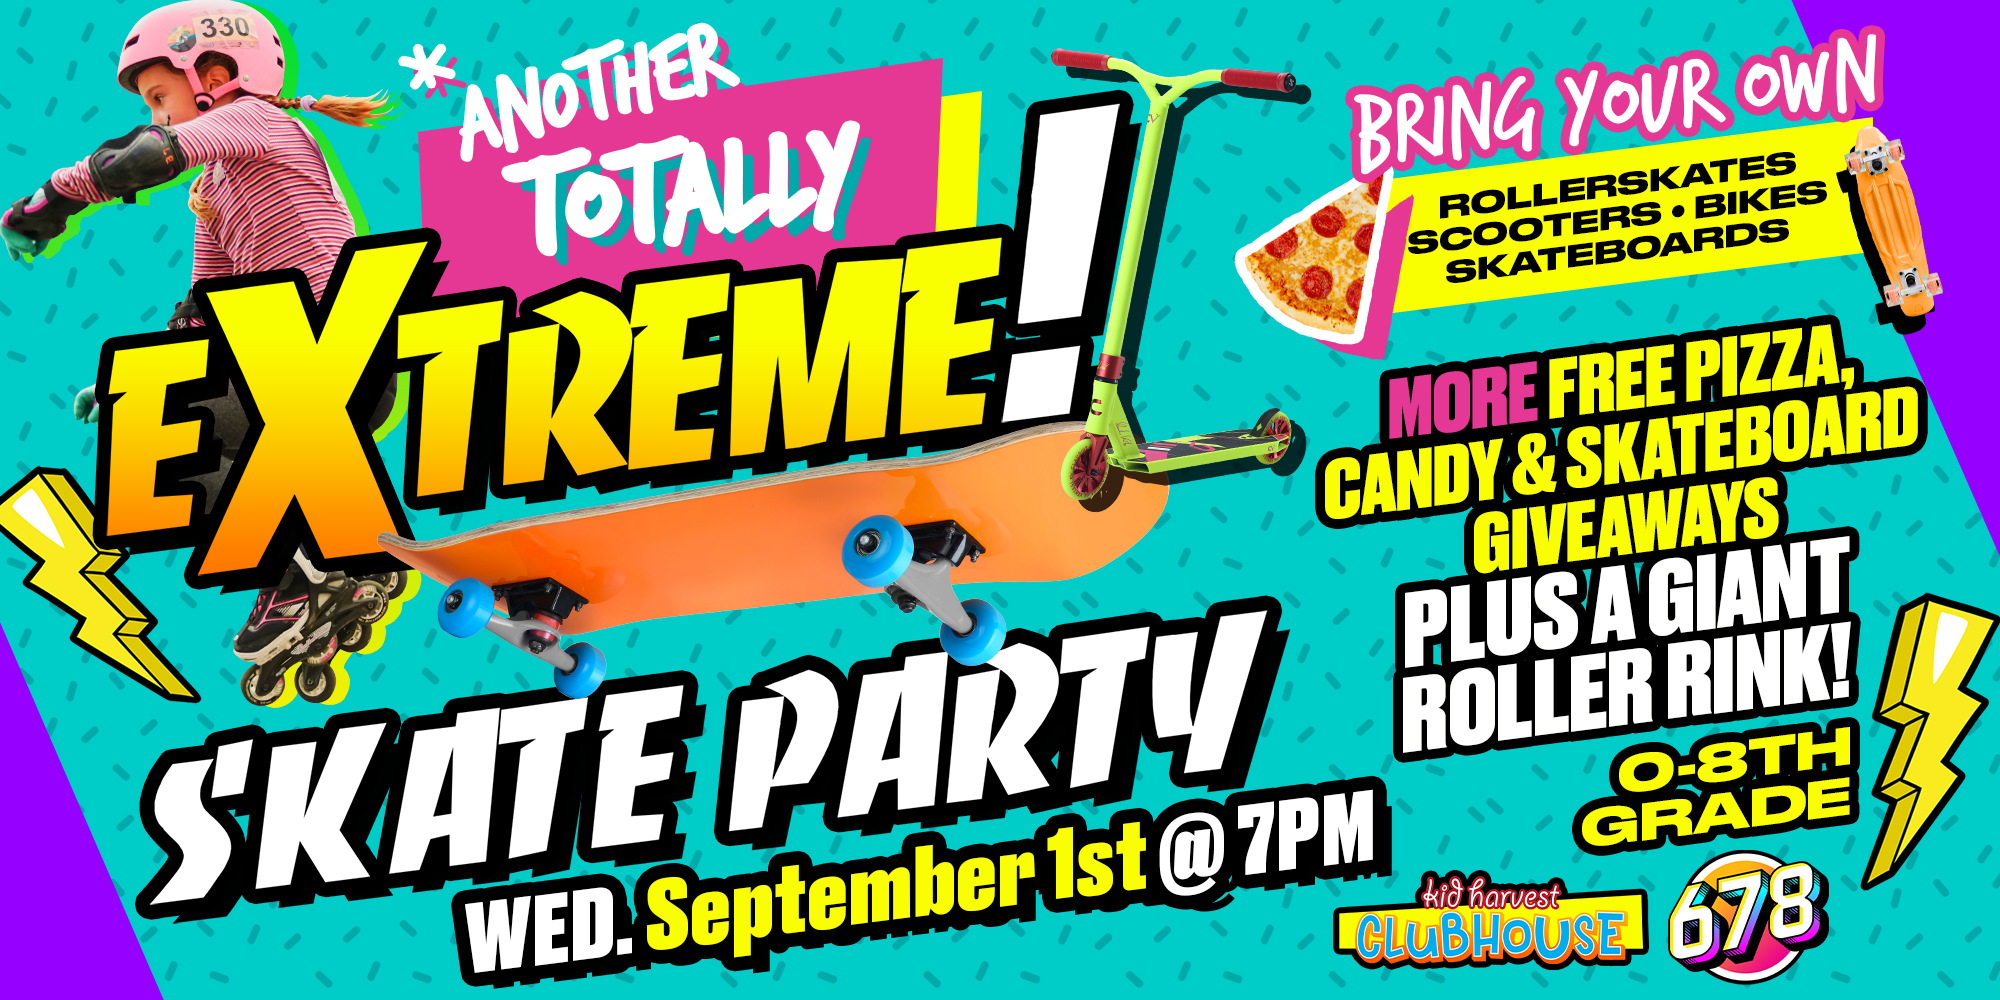 Totally Extreme! Skate Party Wed. September 1st at 7pm Bring Your Own Rollerskates, Scooters, Skateboards, Free Pizza, Candy and Skateboard Giveaways! Kid Harvest Clubhouse 678